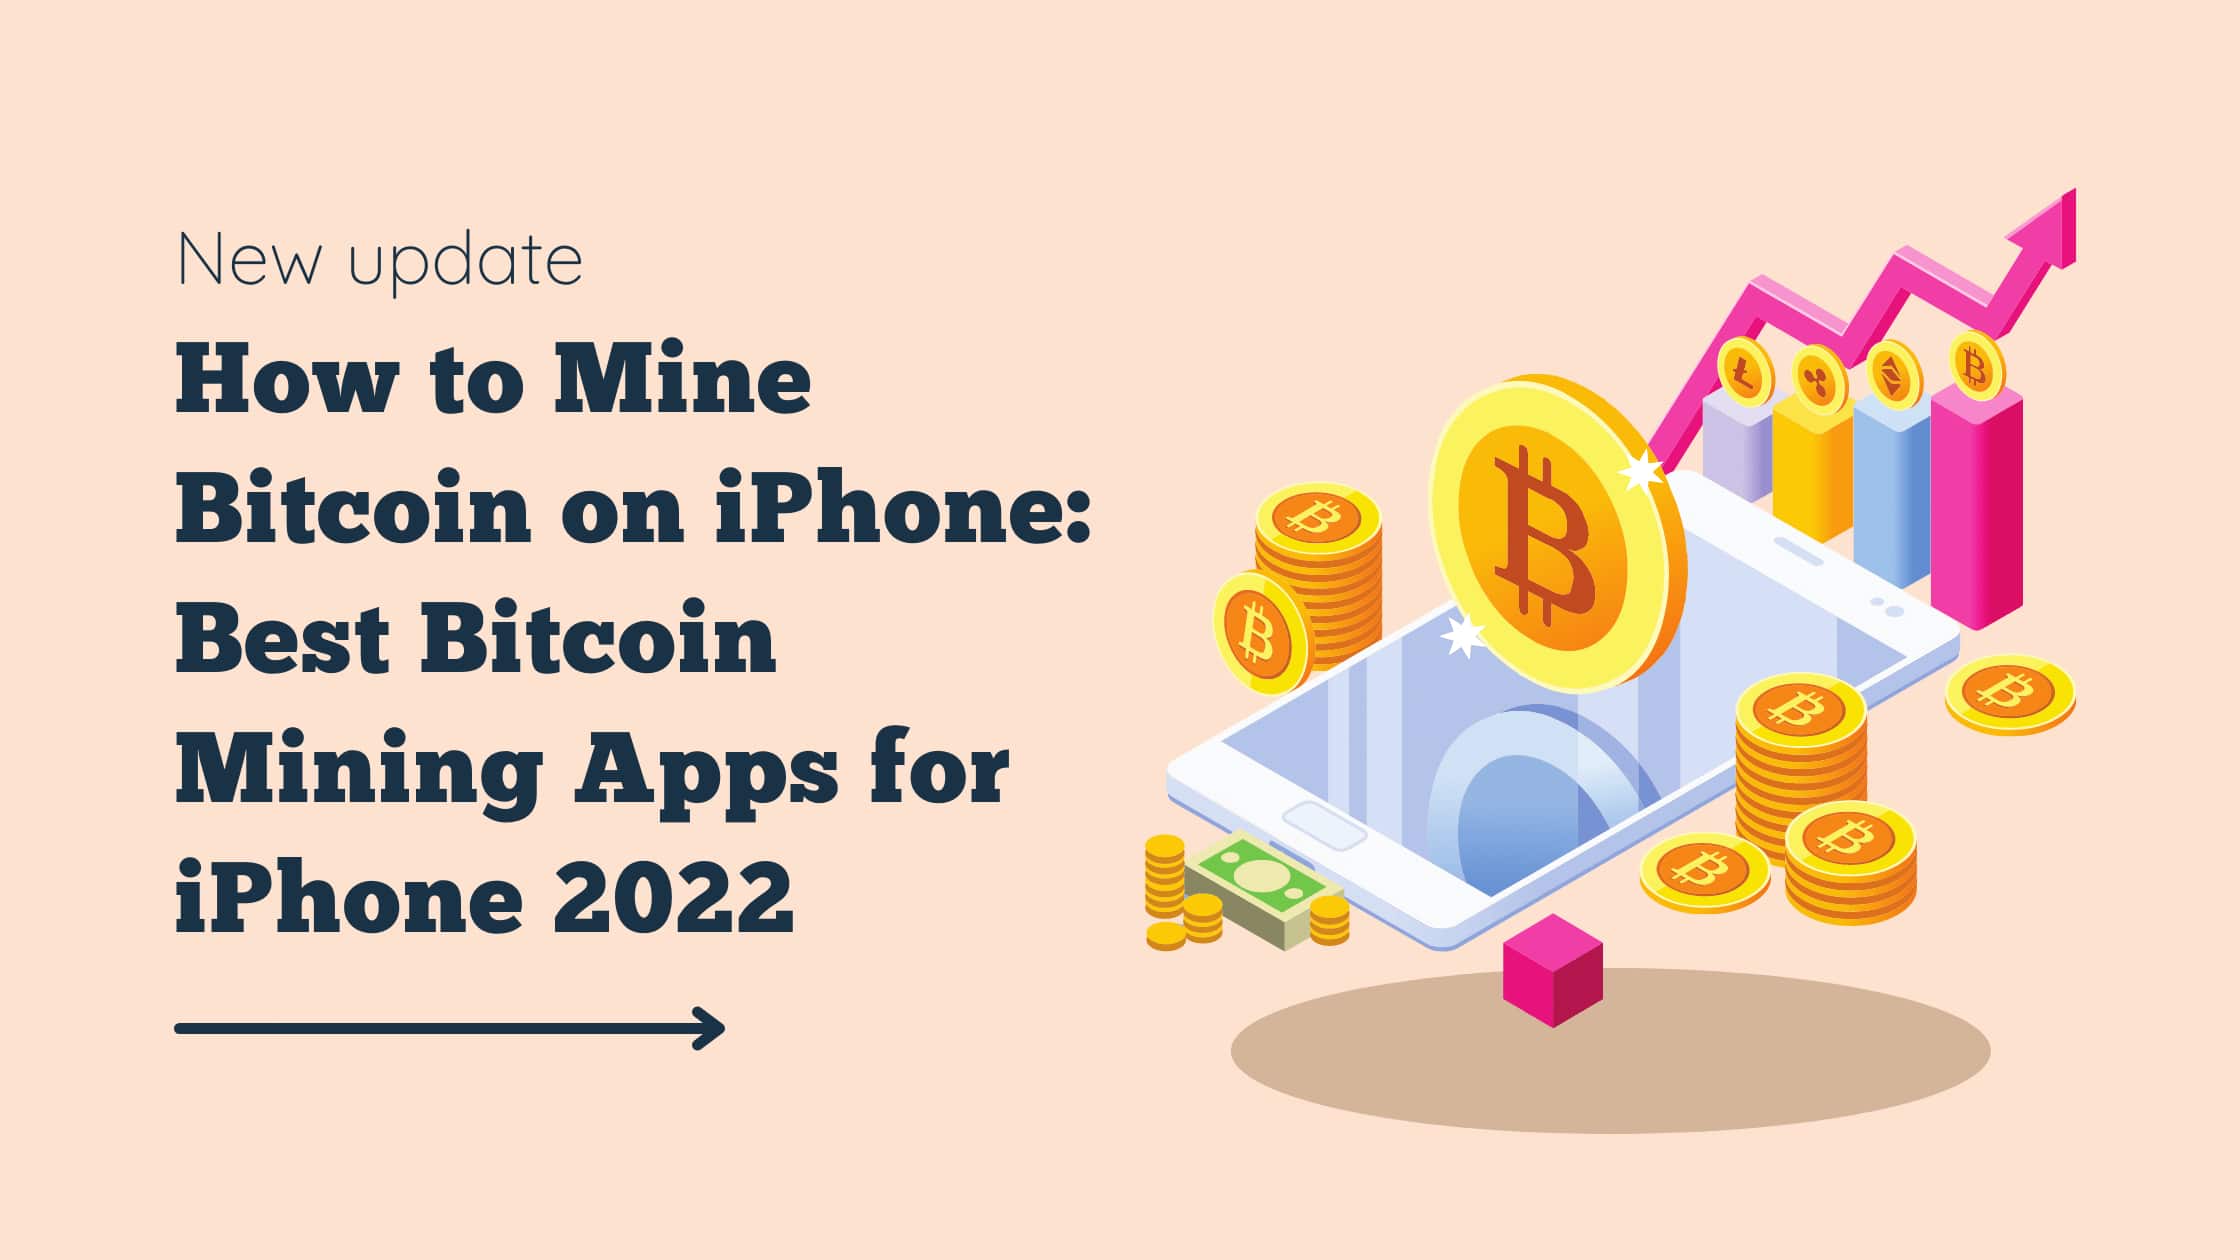 How to Mine Bitcoin on iPhone Best Bitcoin Mining Apps for iPhone 2022